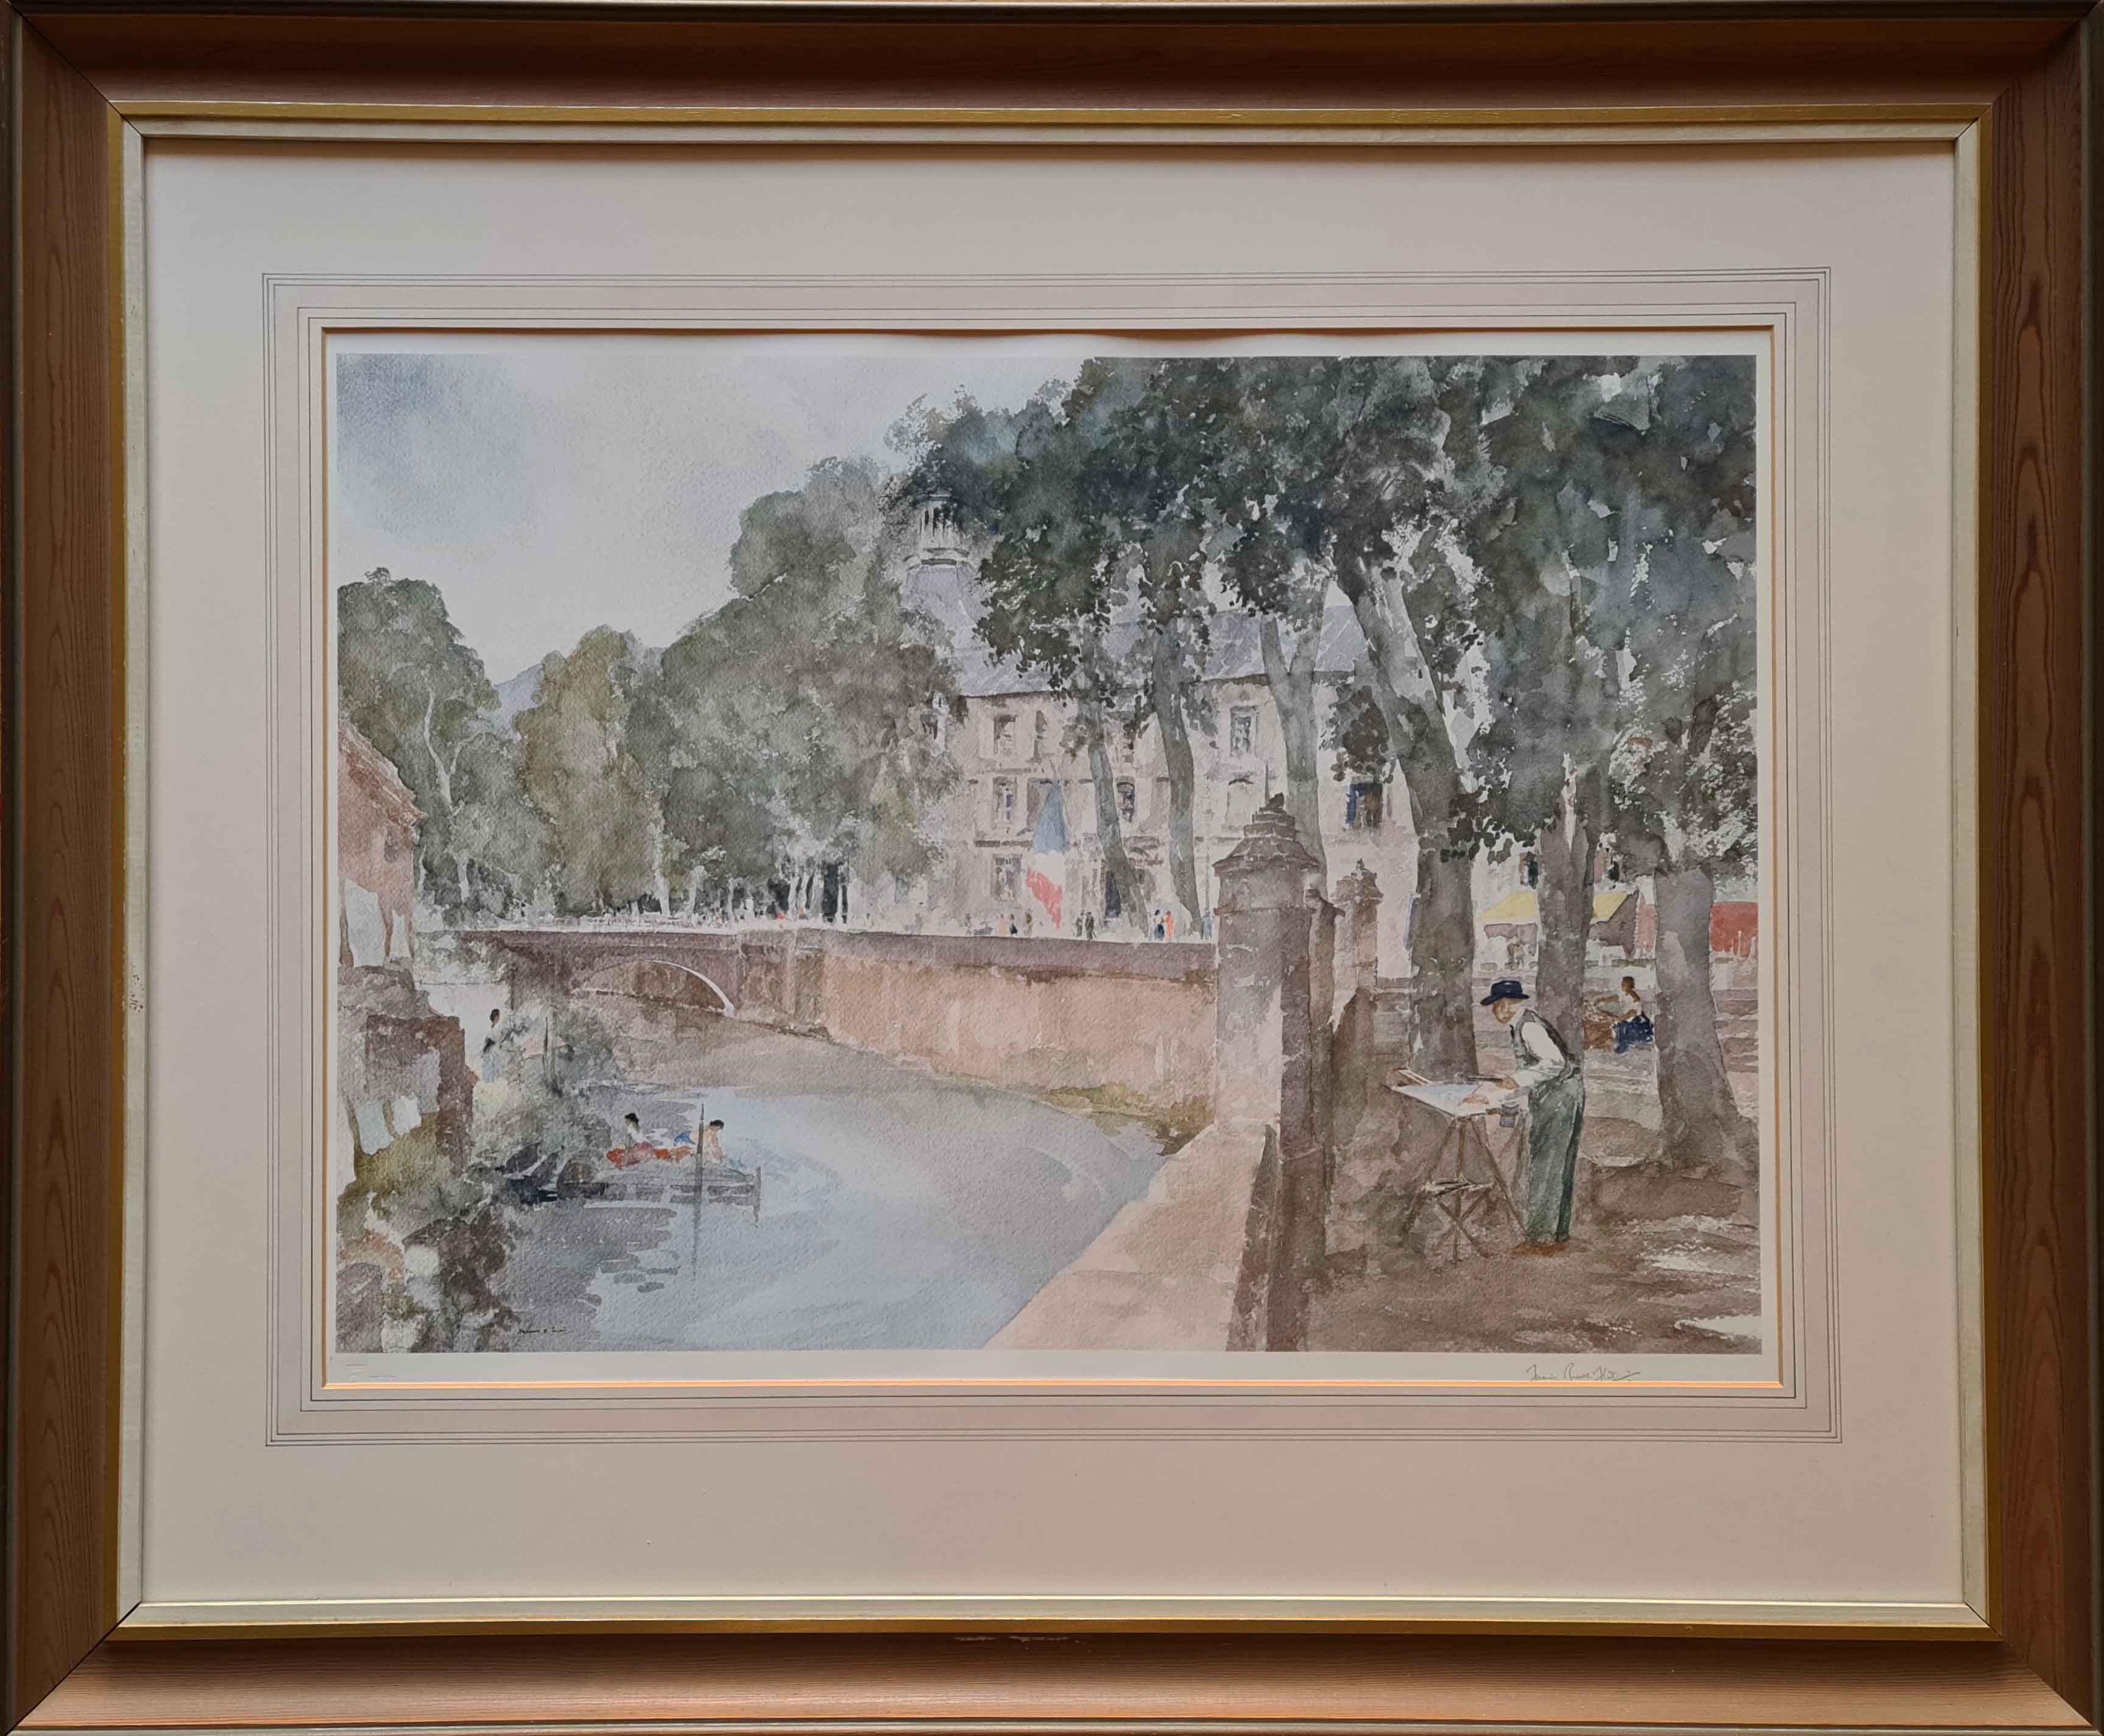 russell flint, my father painting at Brantome, signed limited edition print